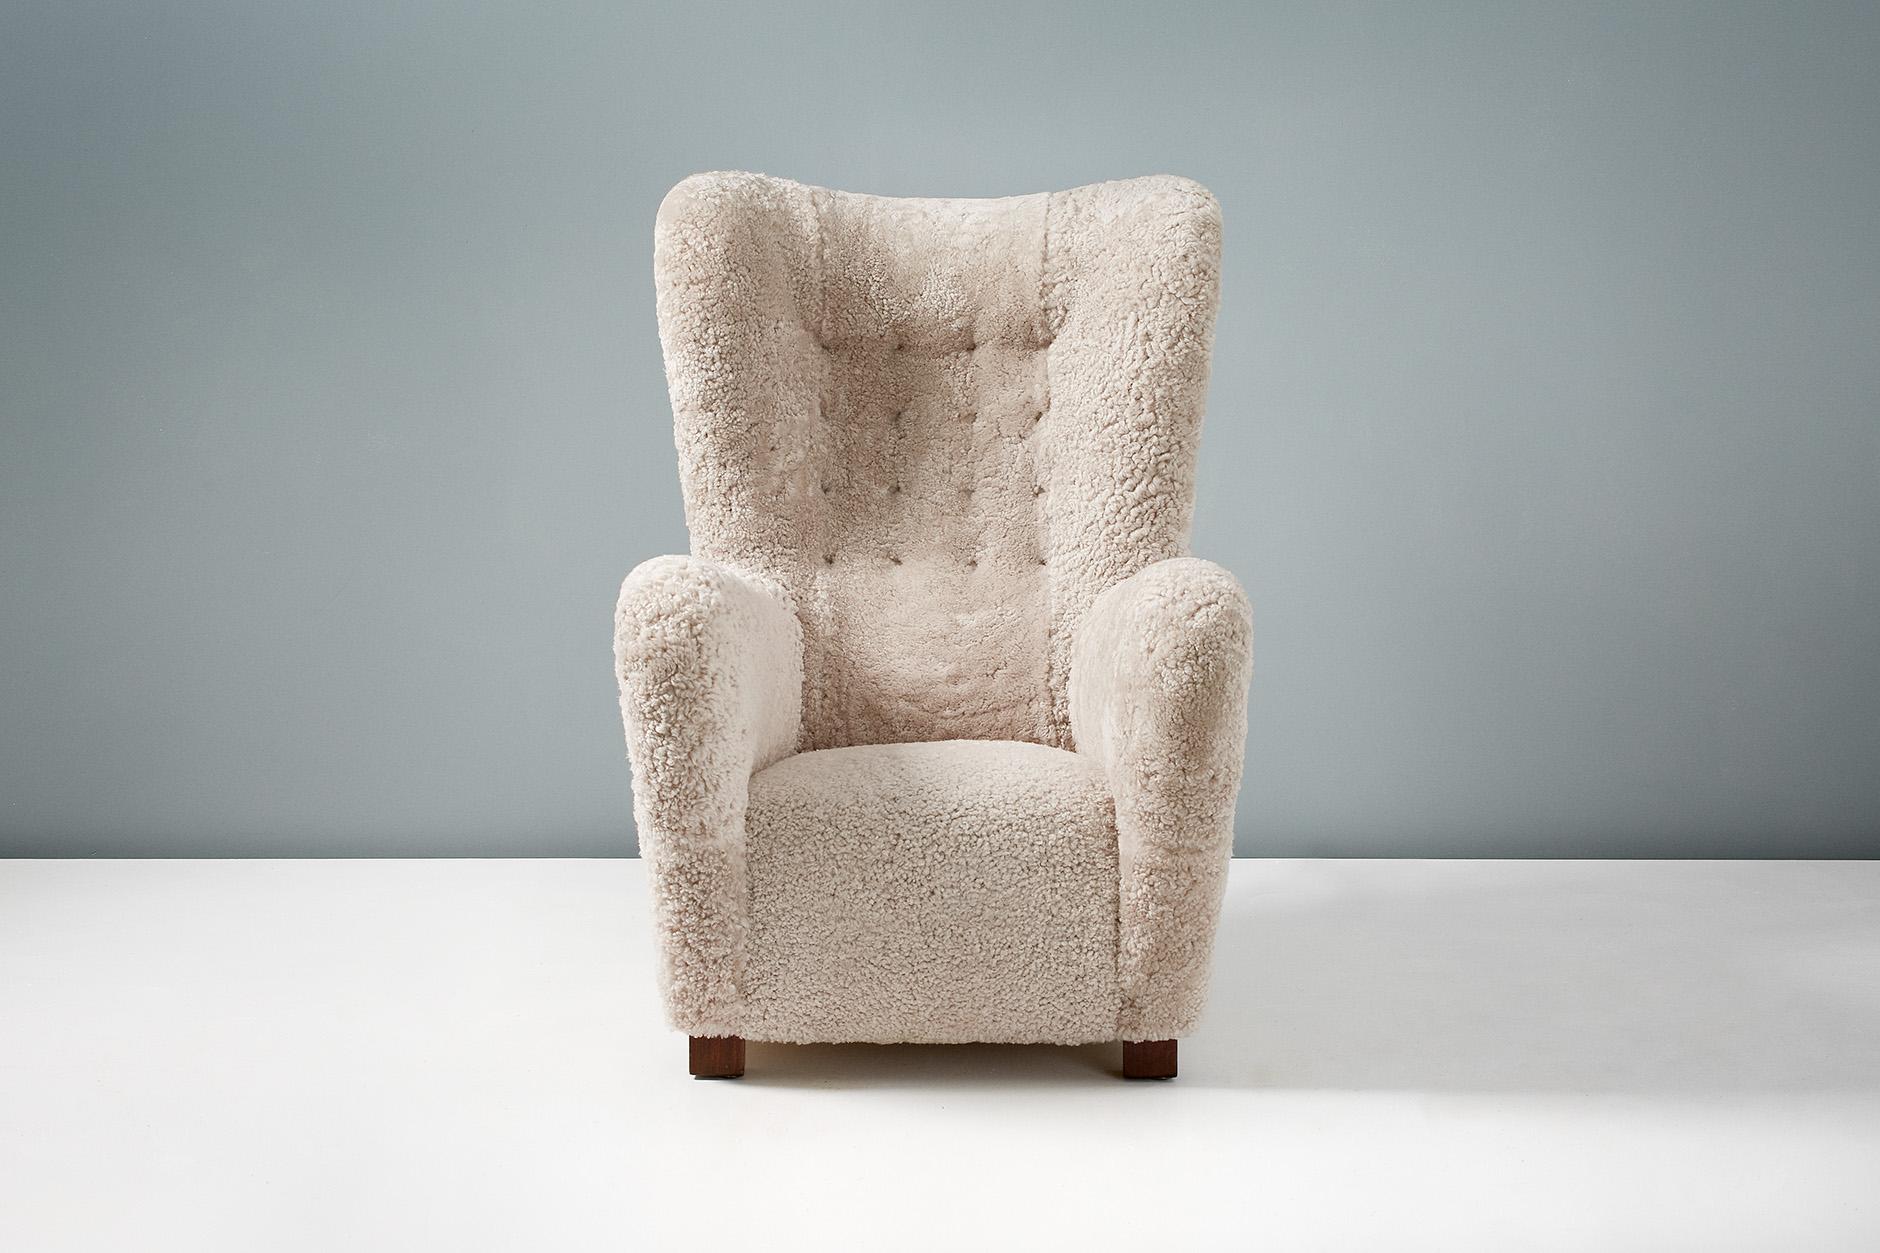 Fritz Hansen Model 1672 wing chair

Large wing chair produced in Denmark in the 1940s by manufacturers Fritz Hansen. The square beech wood legs have been stained and oiled and the chair has been completely reconditioned by our in-house team at our